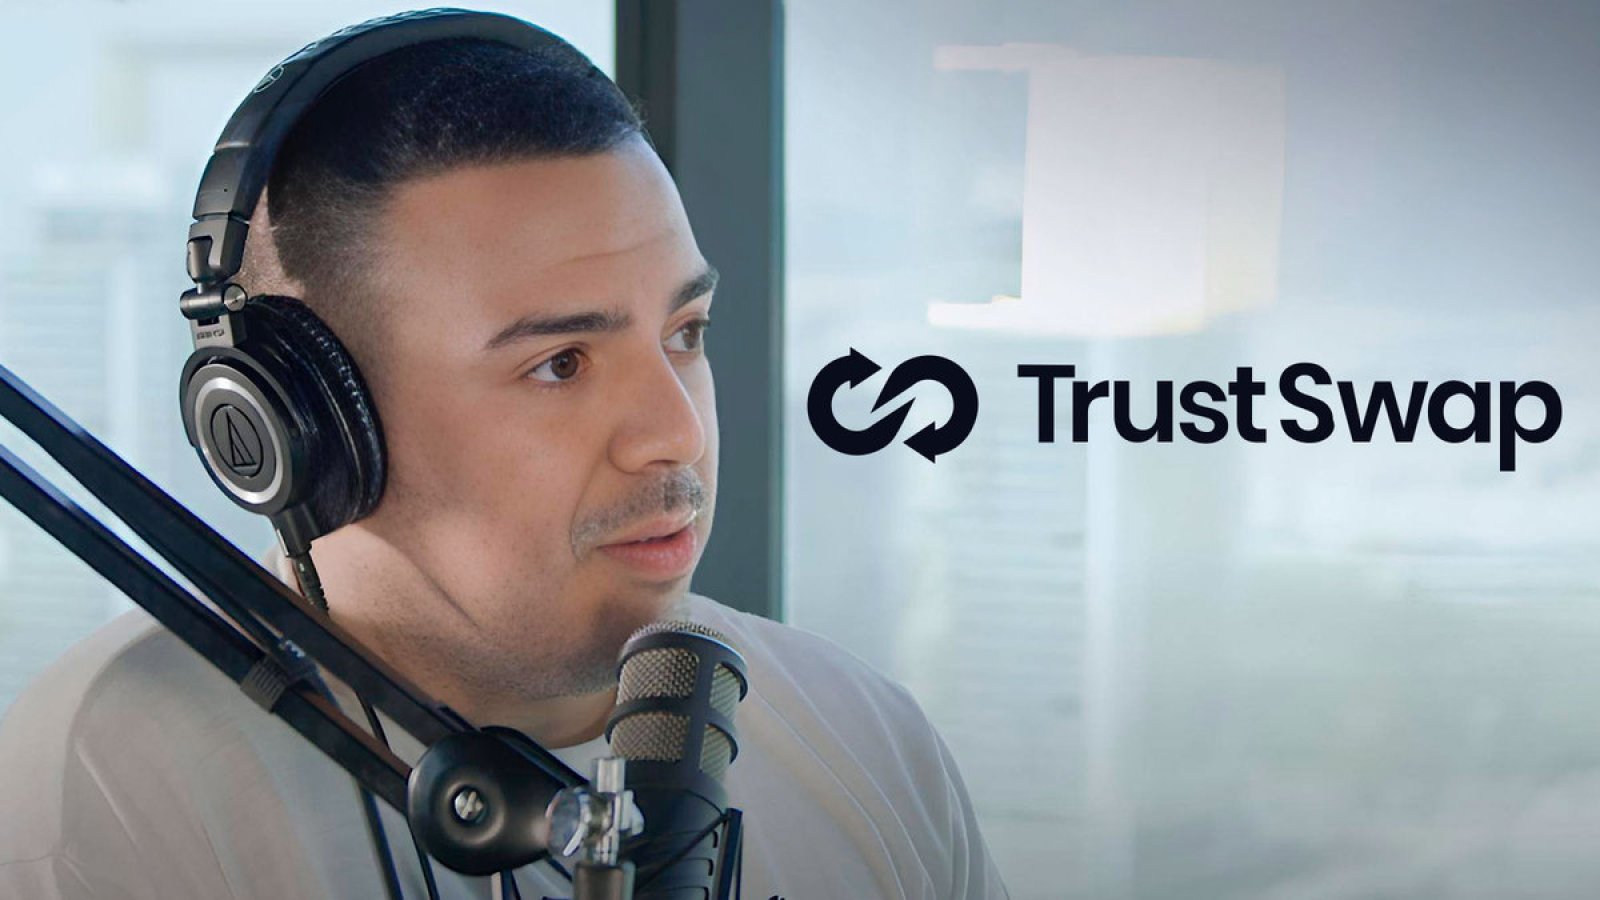 TrustSwap Appoints Naim Boughazi as CEO: Details